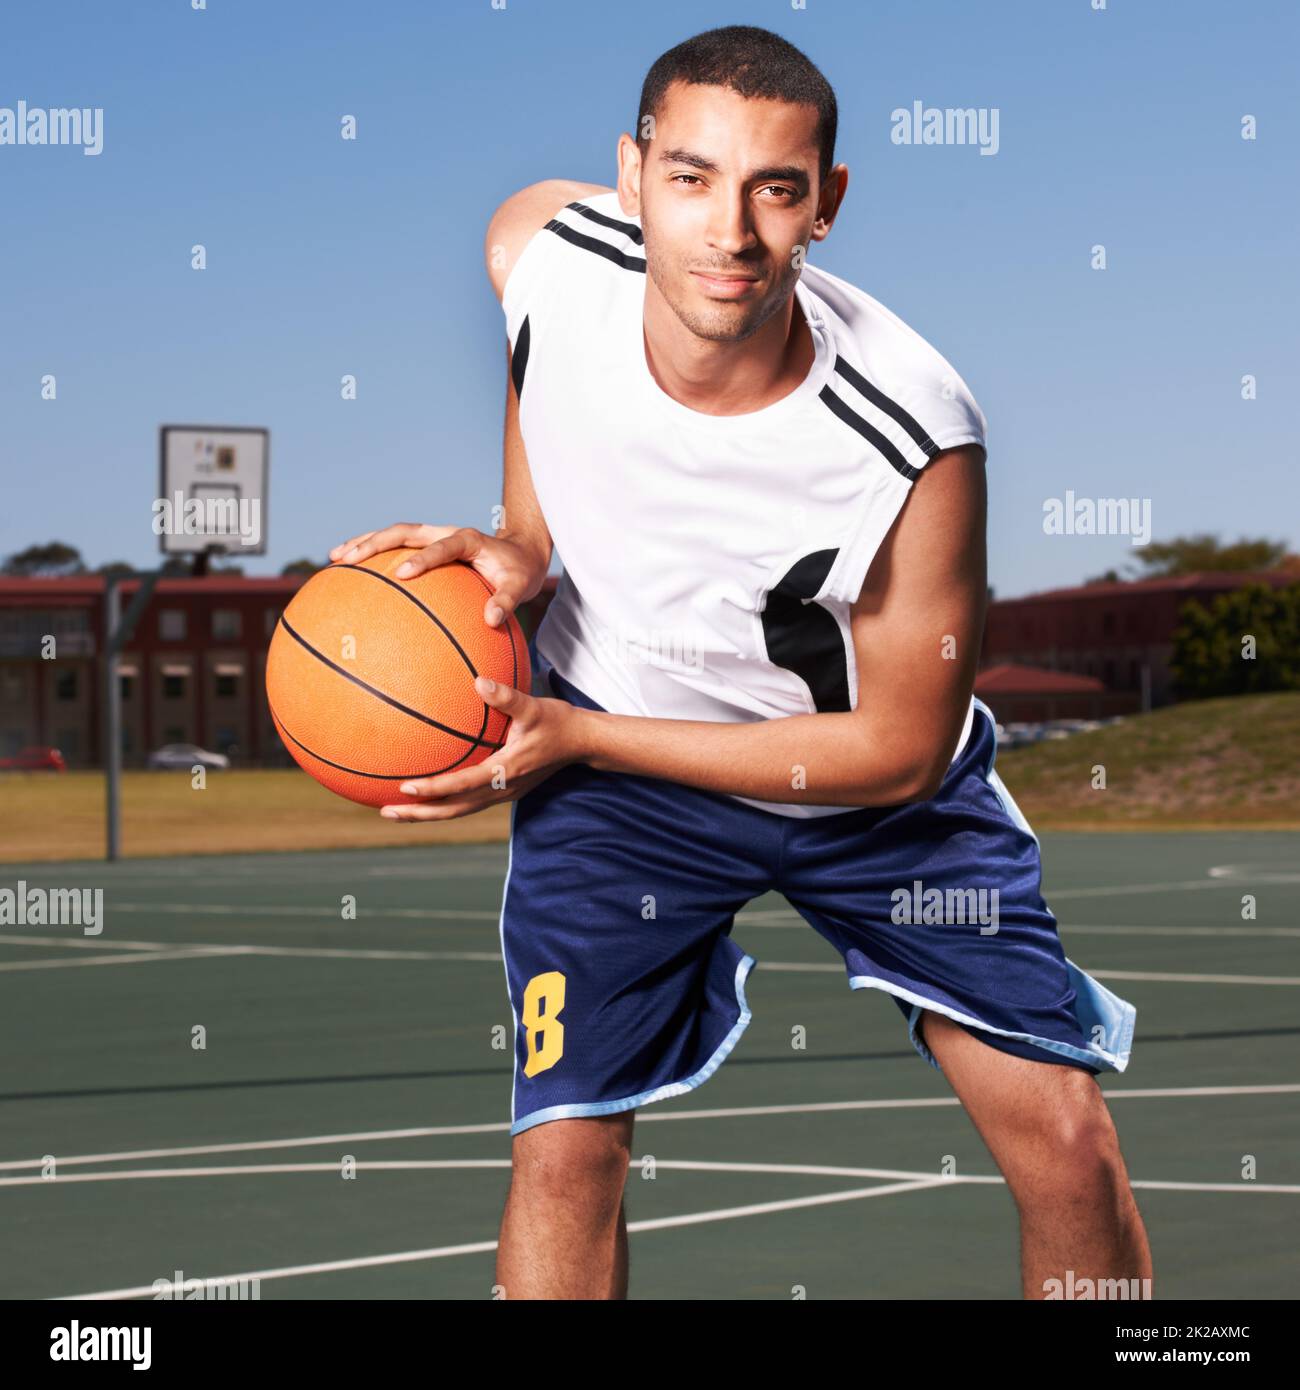 Ive got skills. A young basketball player prepares to dribble a ball. Stock Photo